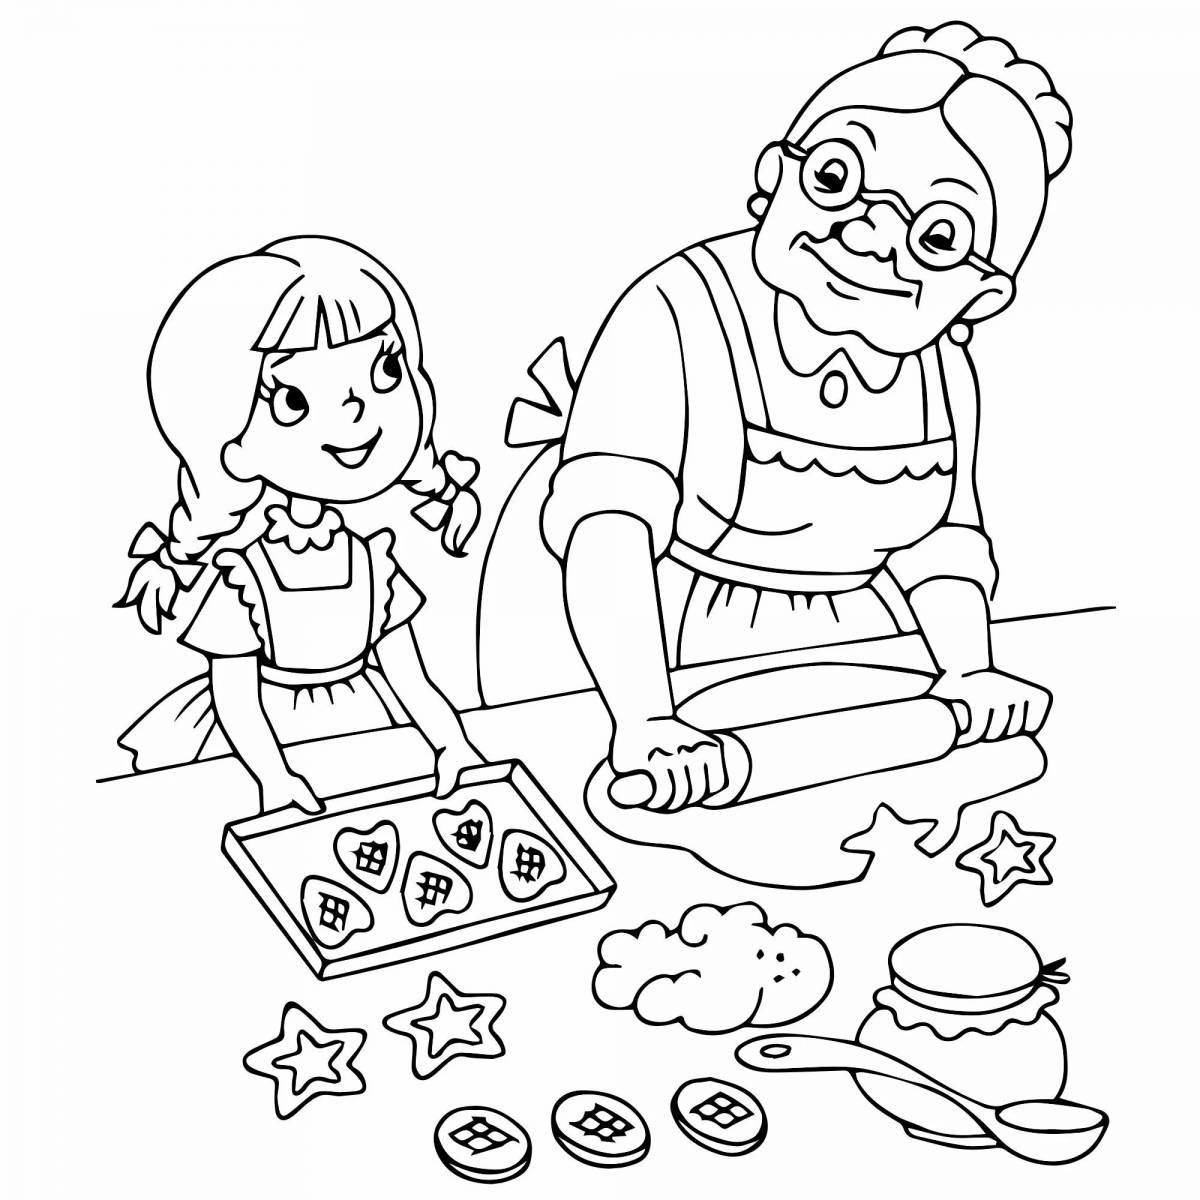 Colorful granddaughter coloring page